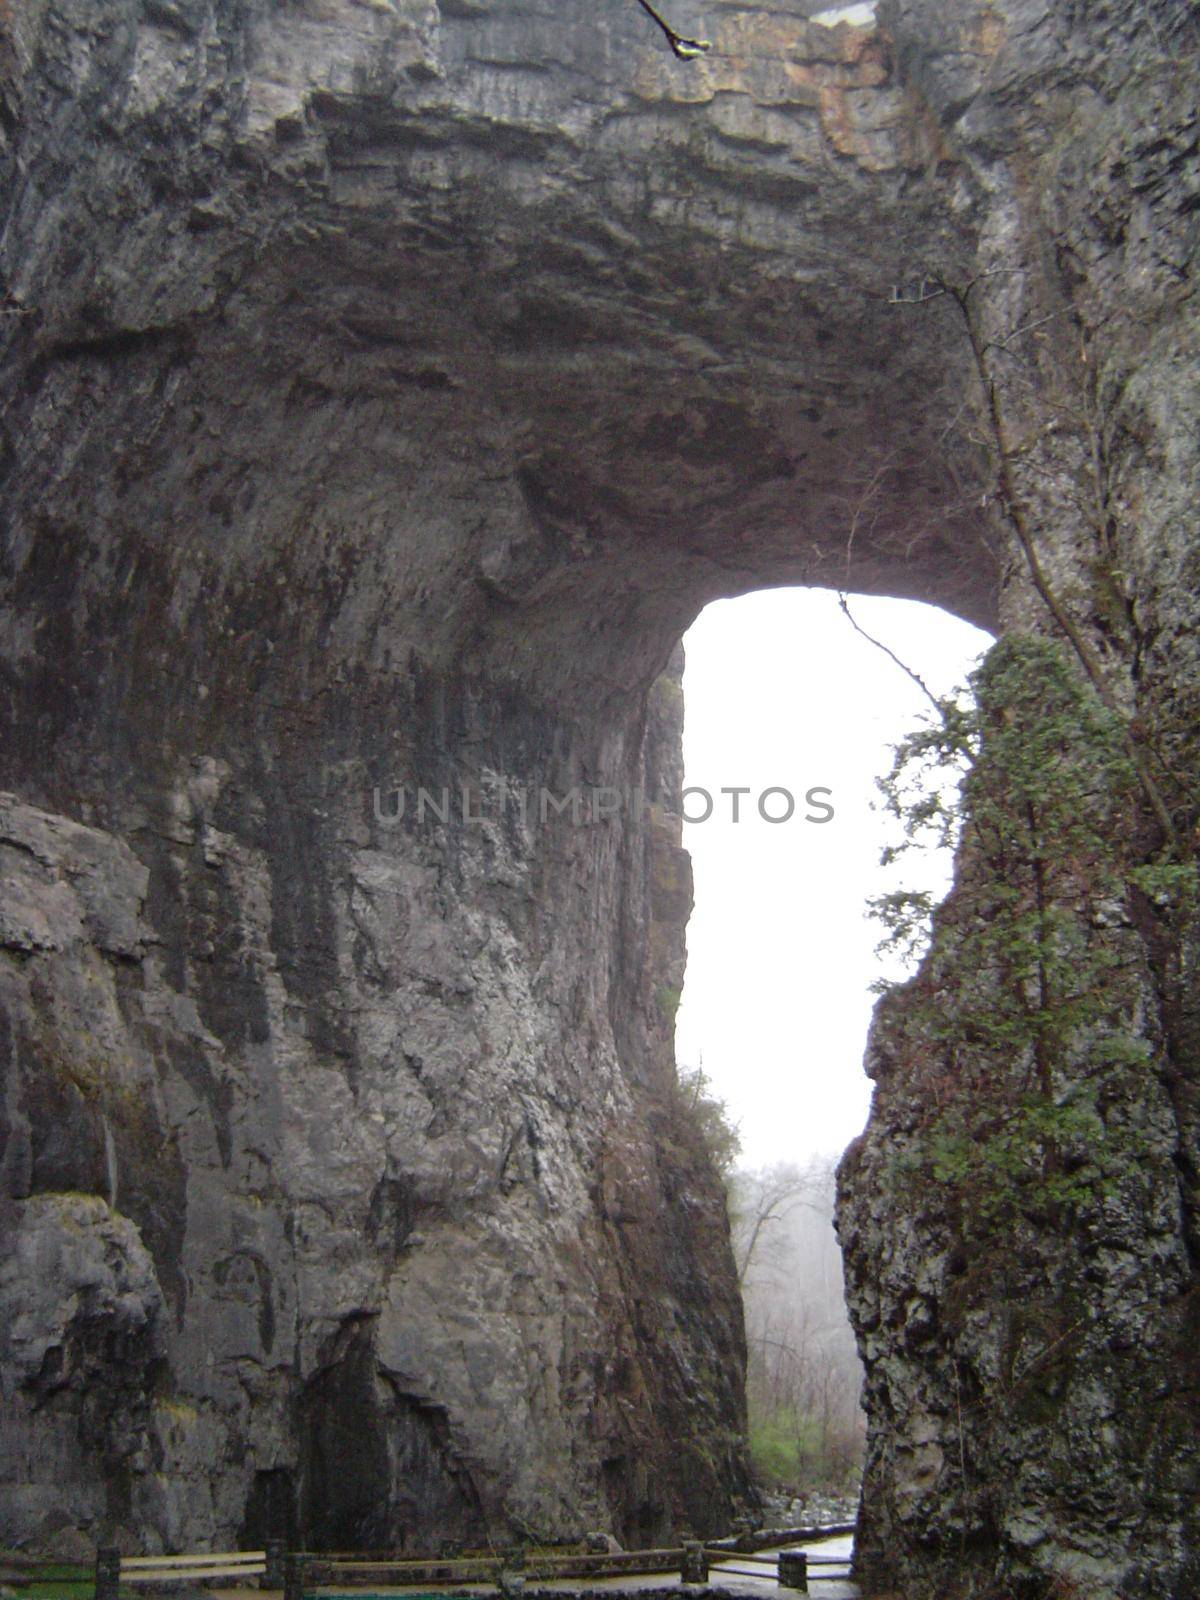 a rock arch in a sheer cliff face